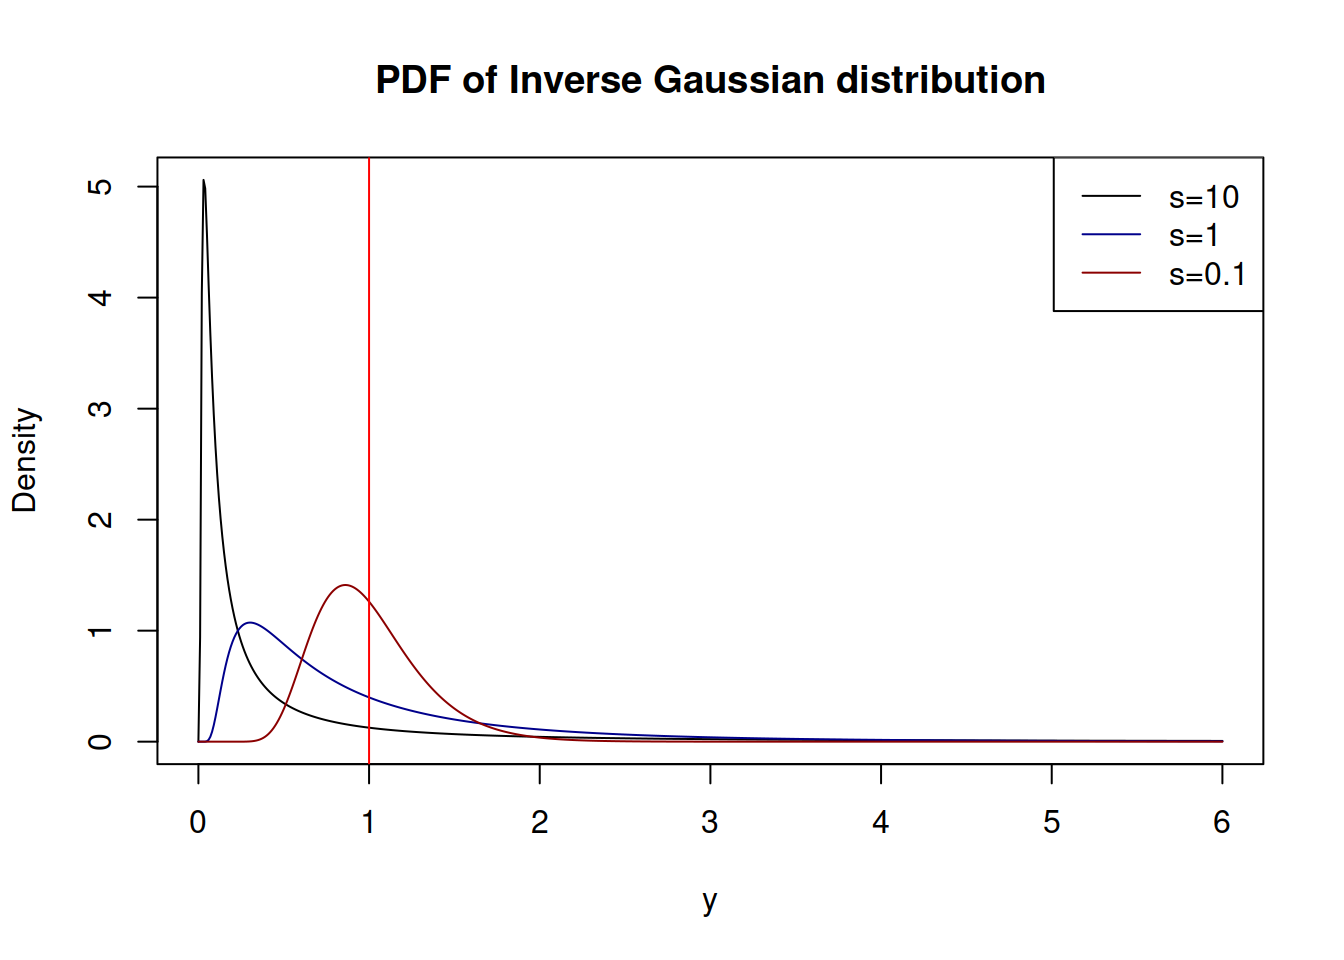 Probability Density Functions of Inverse Gaussian distribution